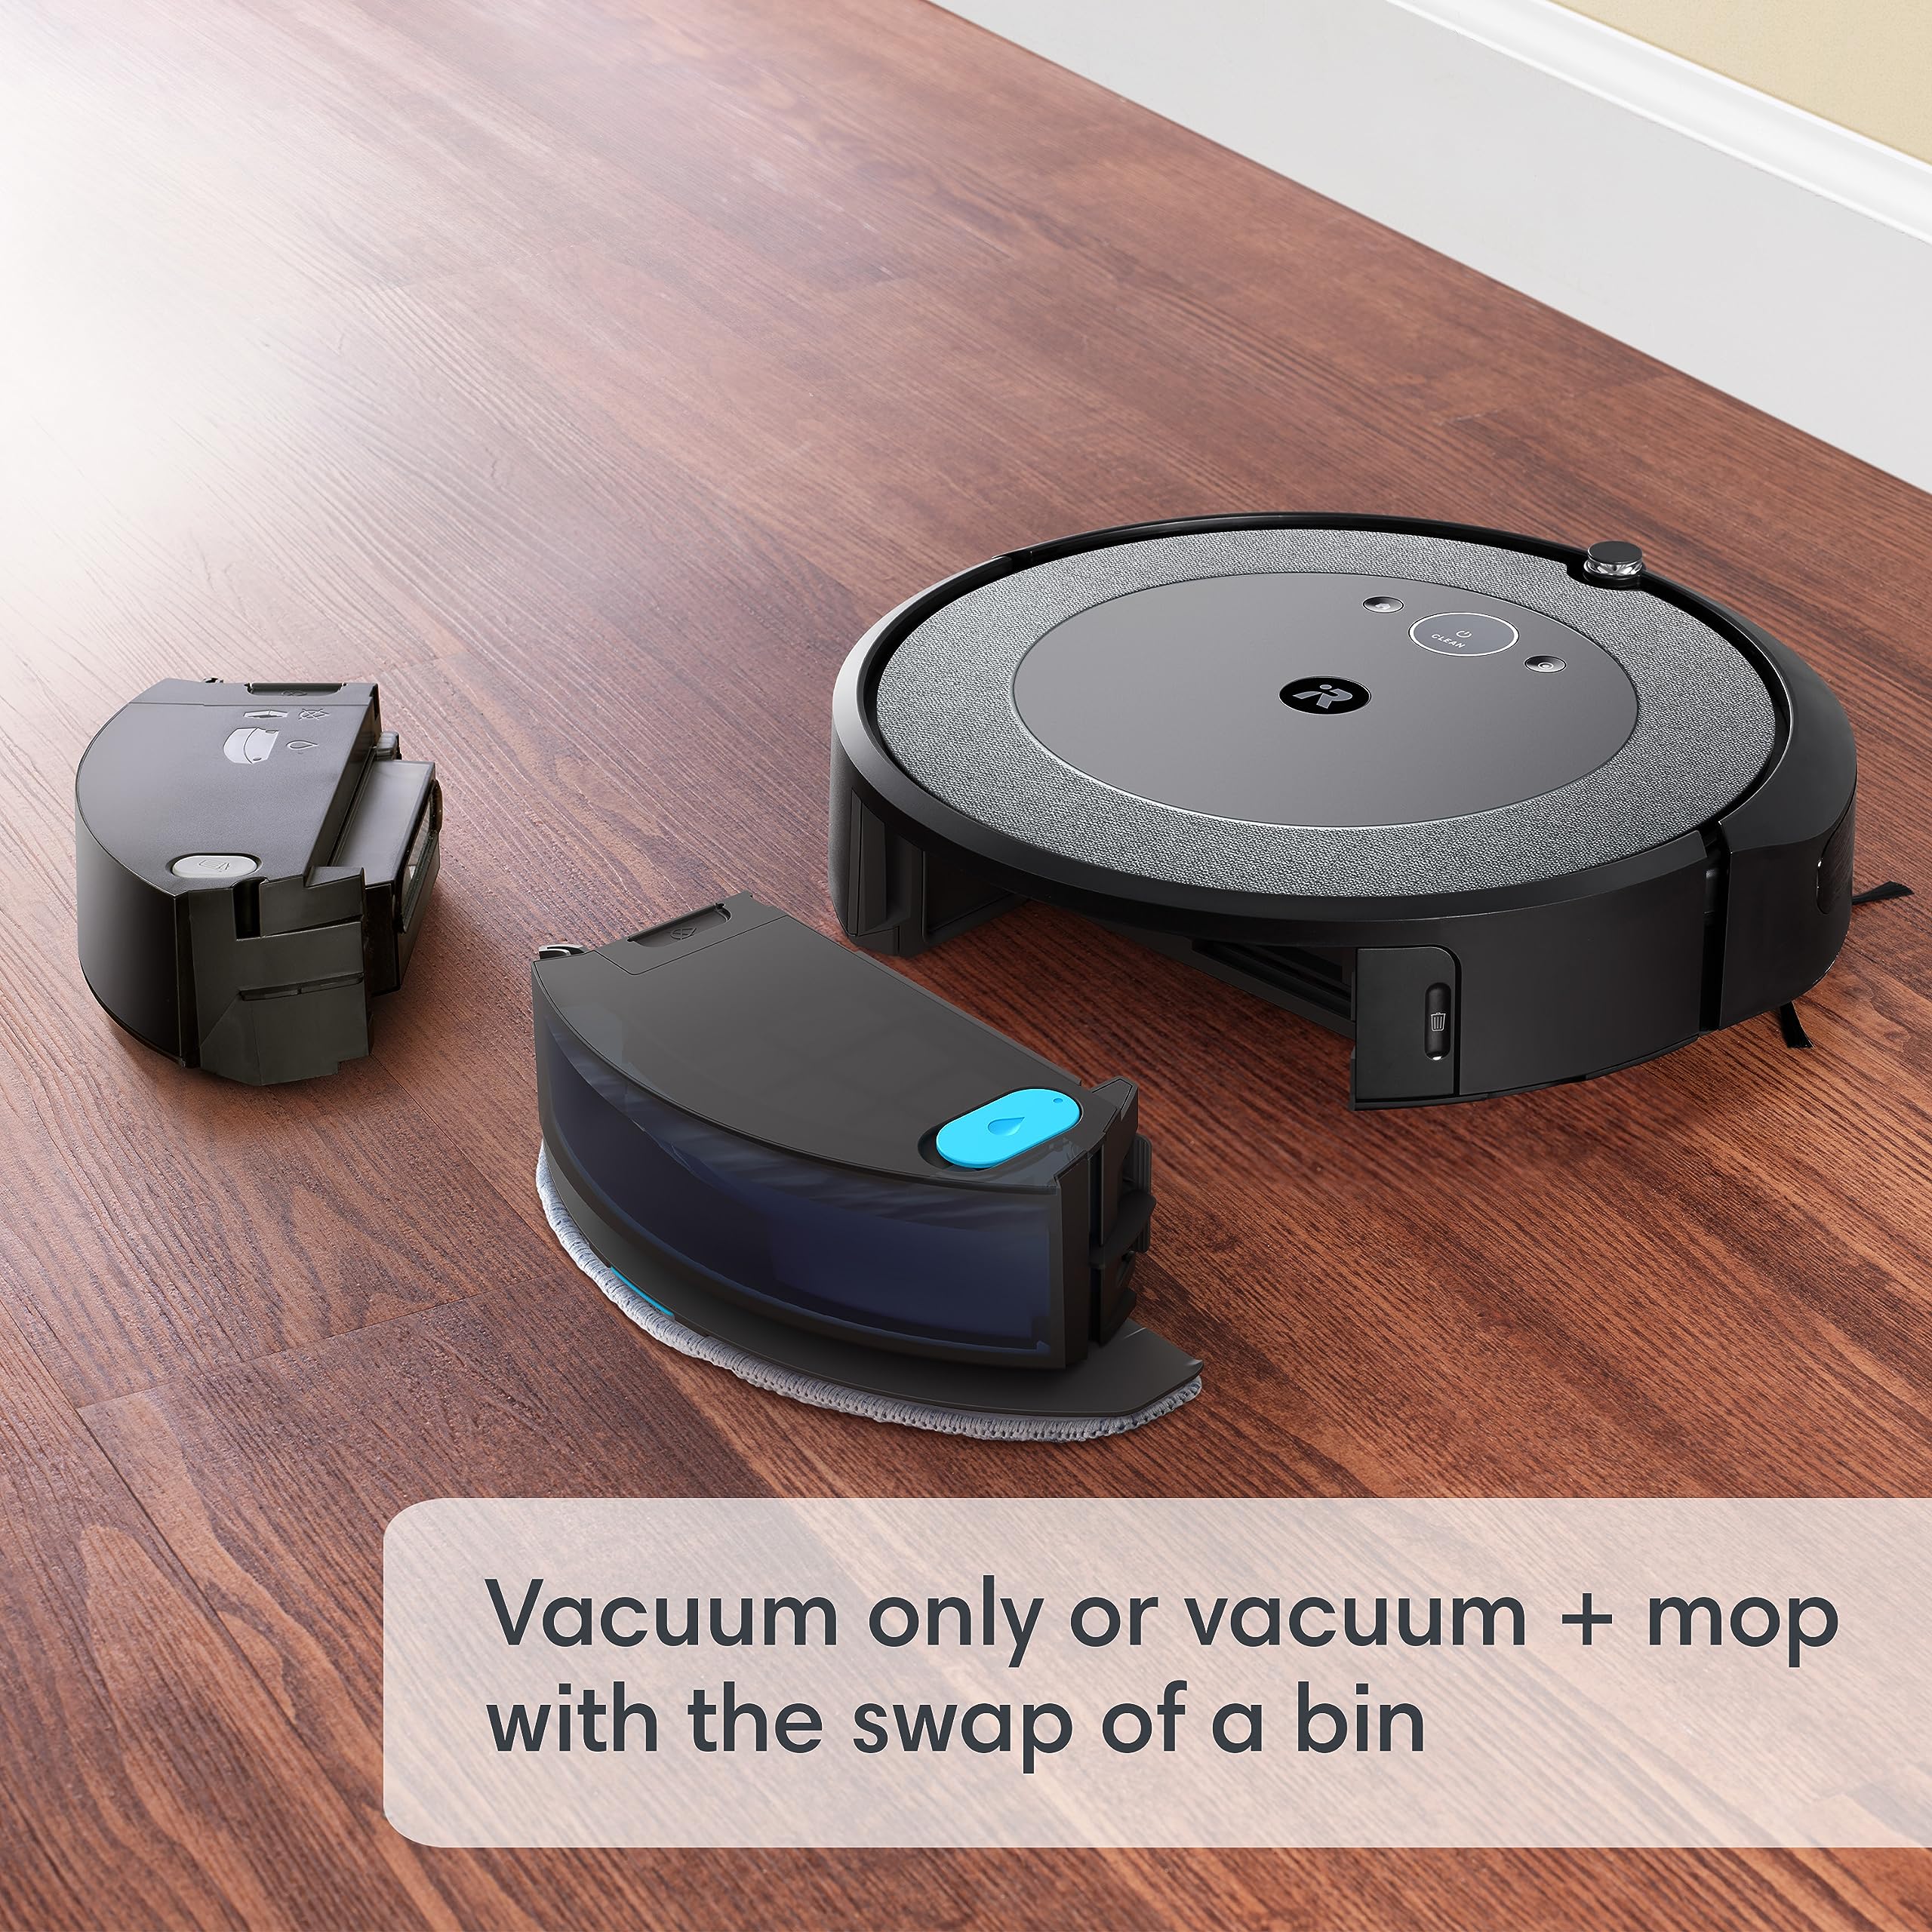 iRobot Roomba Combo i5+ Self-Emptying Robot Vacuum & Mop – Clean by Room with Smart Mapping, Empties Itself for Up to 60 Days, Alexa Enabled, Personalized Cleaning OS, Ideal for Pet Hair